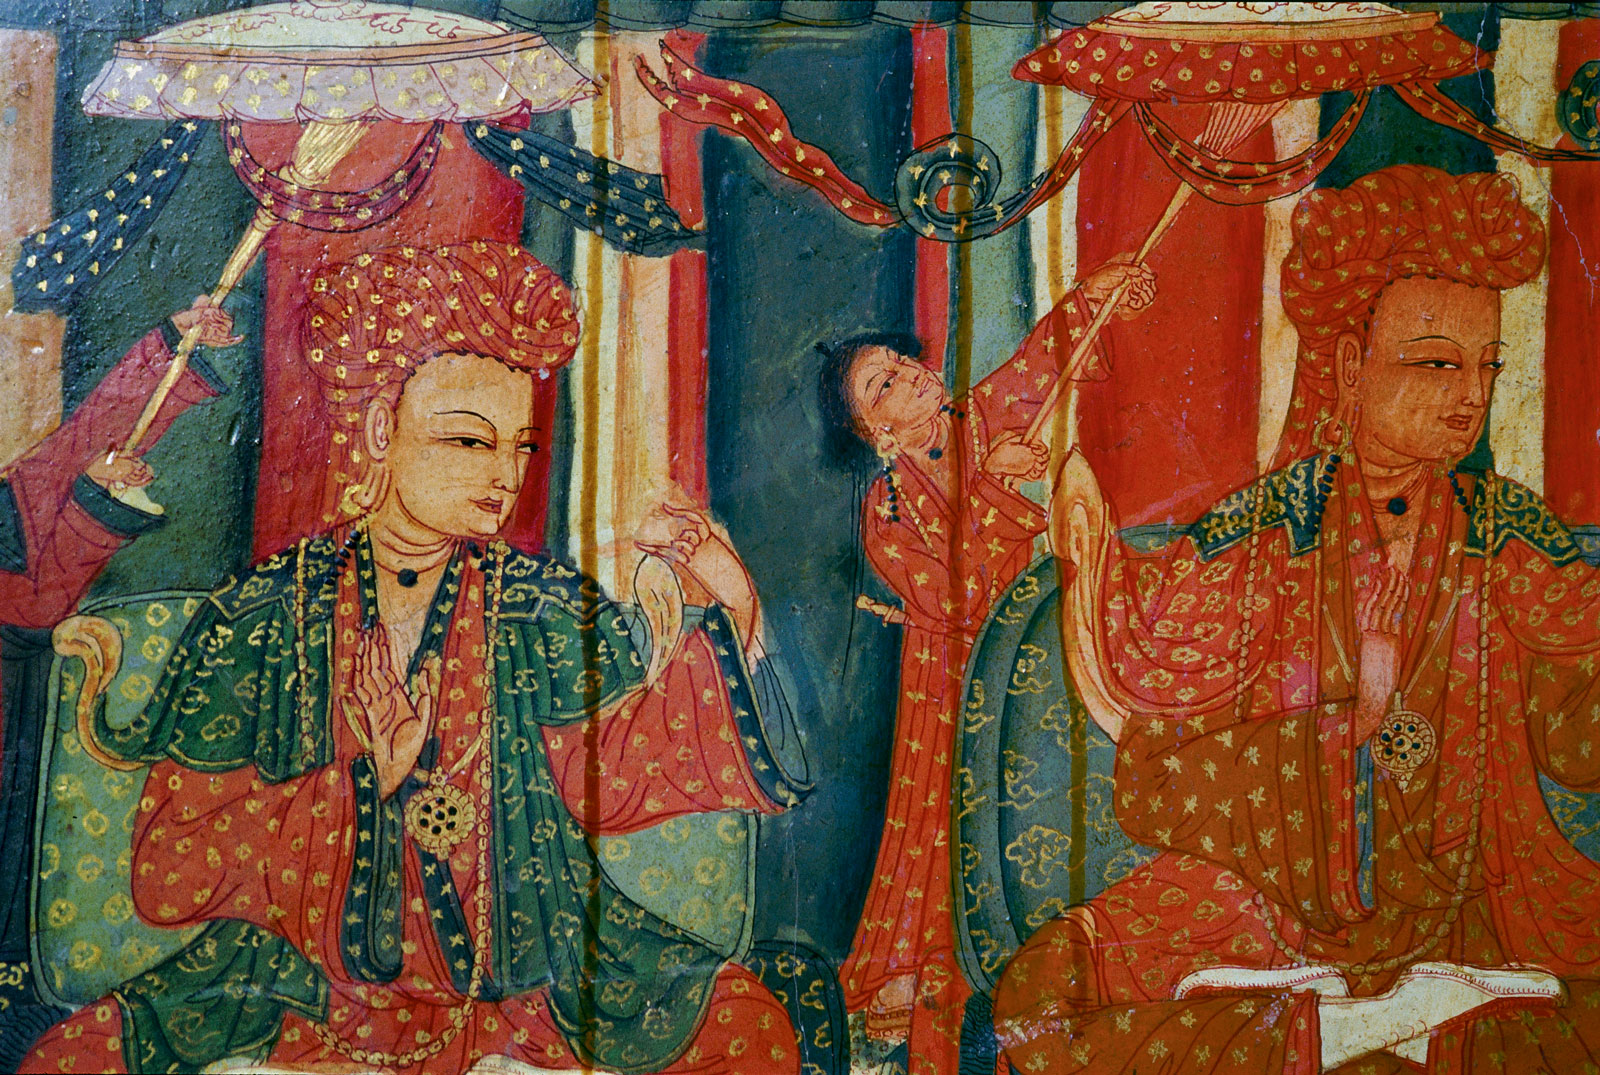 Detail of a wall painting in the Red Temple showing members of the Guge royal family attending the consecration of the temple, Tsparang, fifteenth century